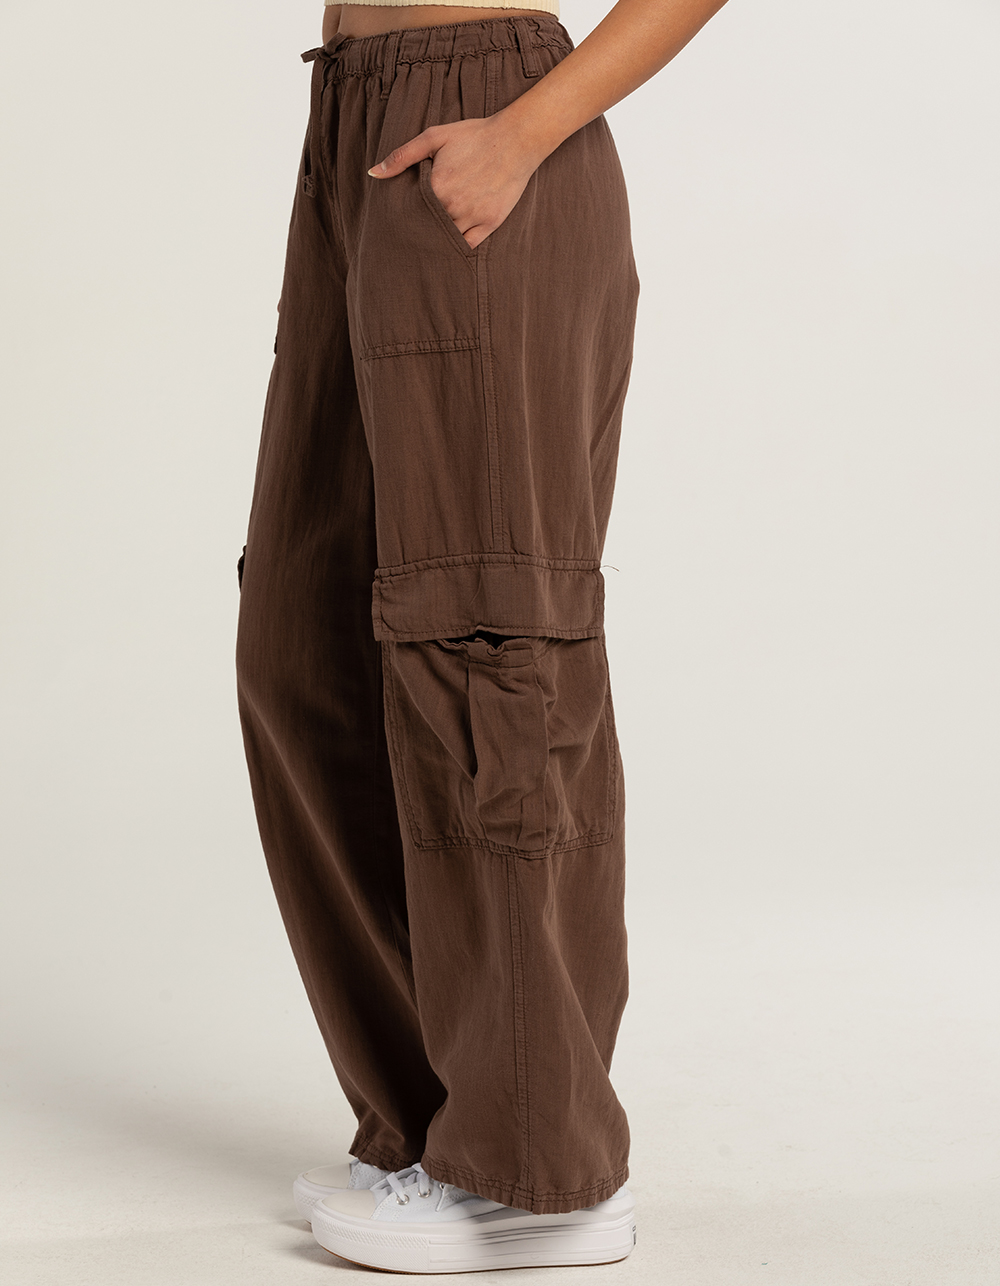 Bdg Urban Outfitters Linen Y2K Cargo Pants - Light Brown - Small